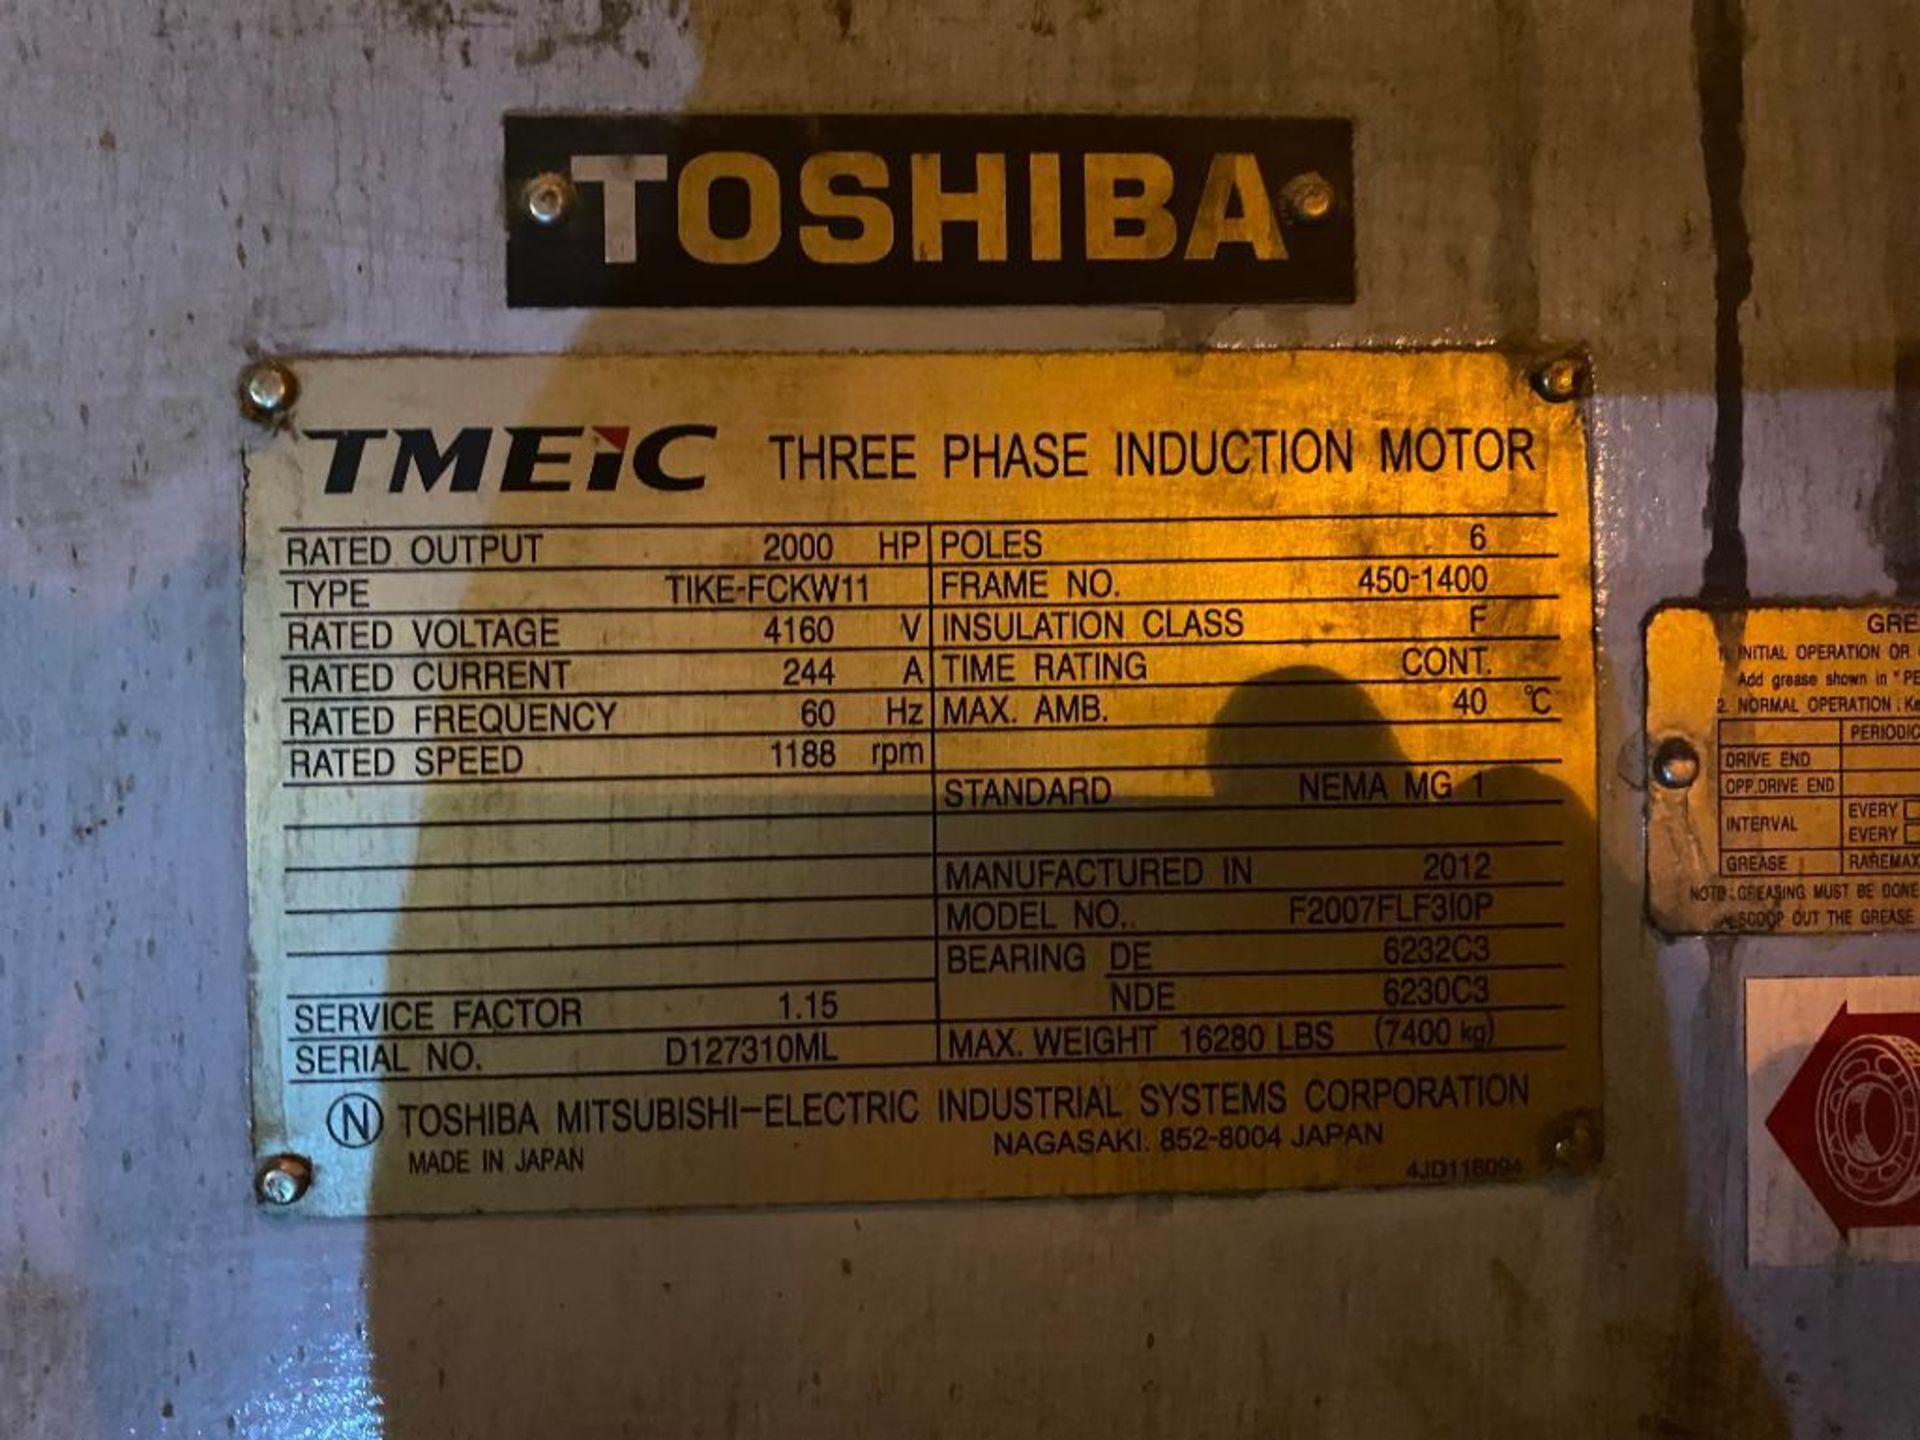 Toshiba TMEIC 2000 HP Electric Motor, Rated Voltage 4160, 1188 RPM, 60 Hz, Type TIKE-FCKW11, Frame 4 - Image 3 of 4